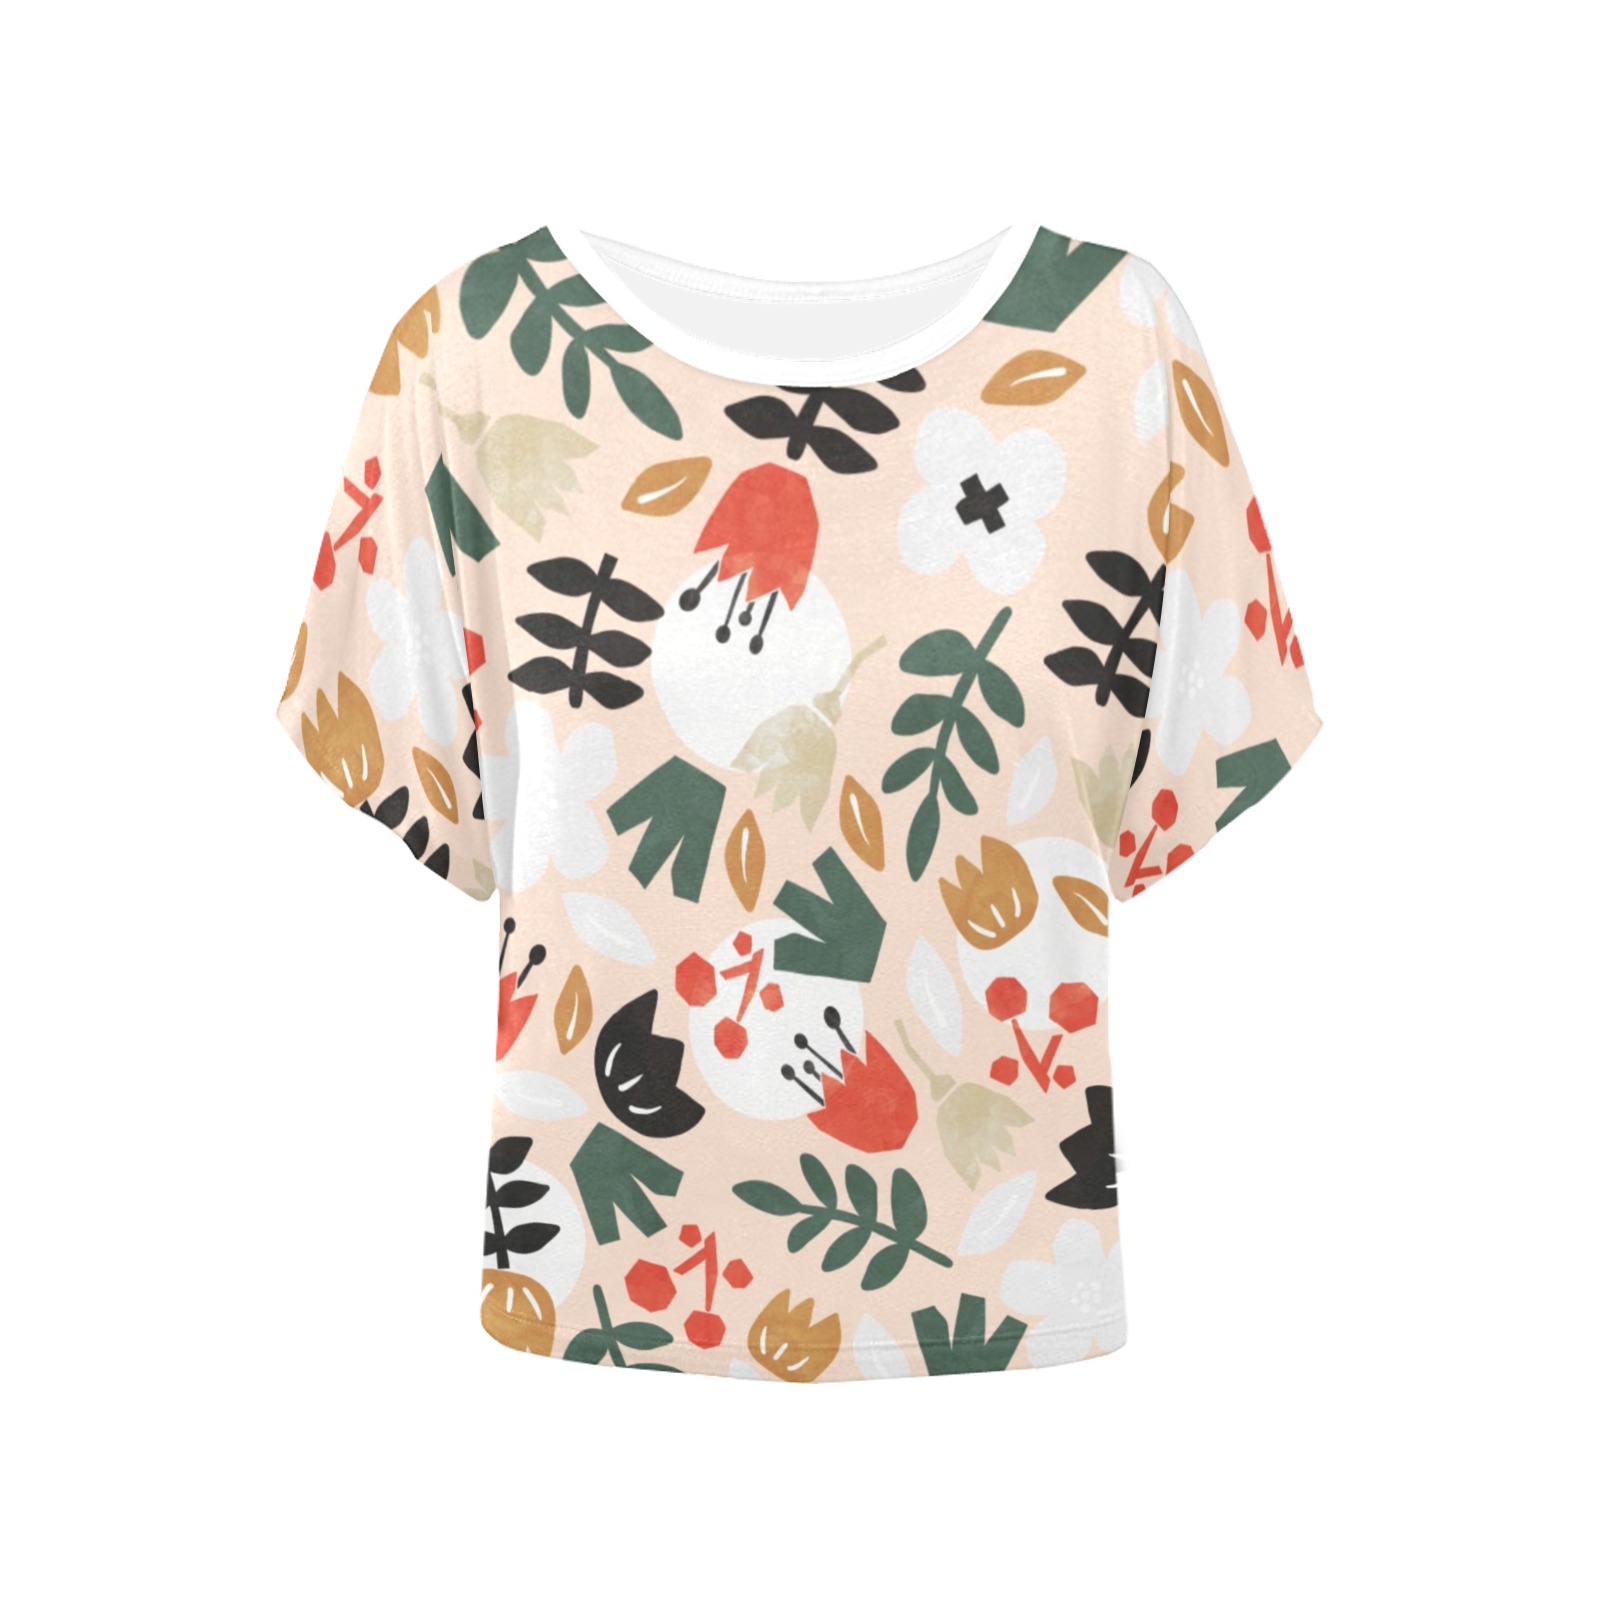 Modern floral shapes 71 Women's Batwing-Sleeved Blouse T shirt (Model T44)